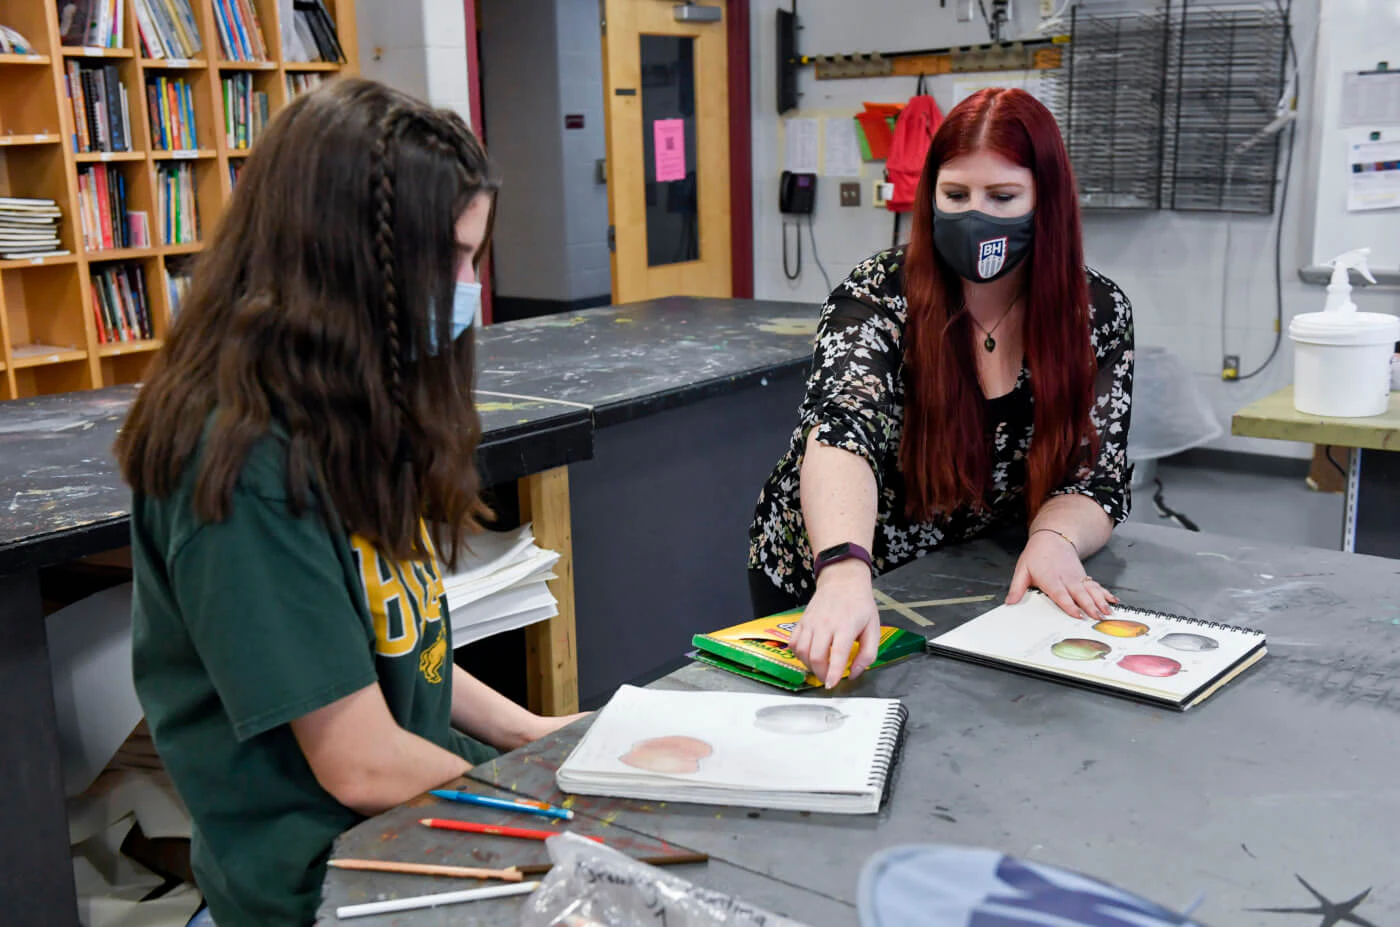 Angelina DeChristopher, a ninth grade student, works with art teacher Jennilee Miller at Brandywine Heights High School in Longswamp Township, March 1, 2021. (Photo by Ben Hasty/MediaNews Group/Reading Eagle via Getty Images)